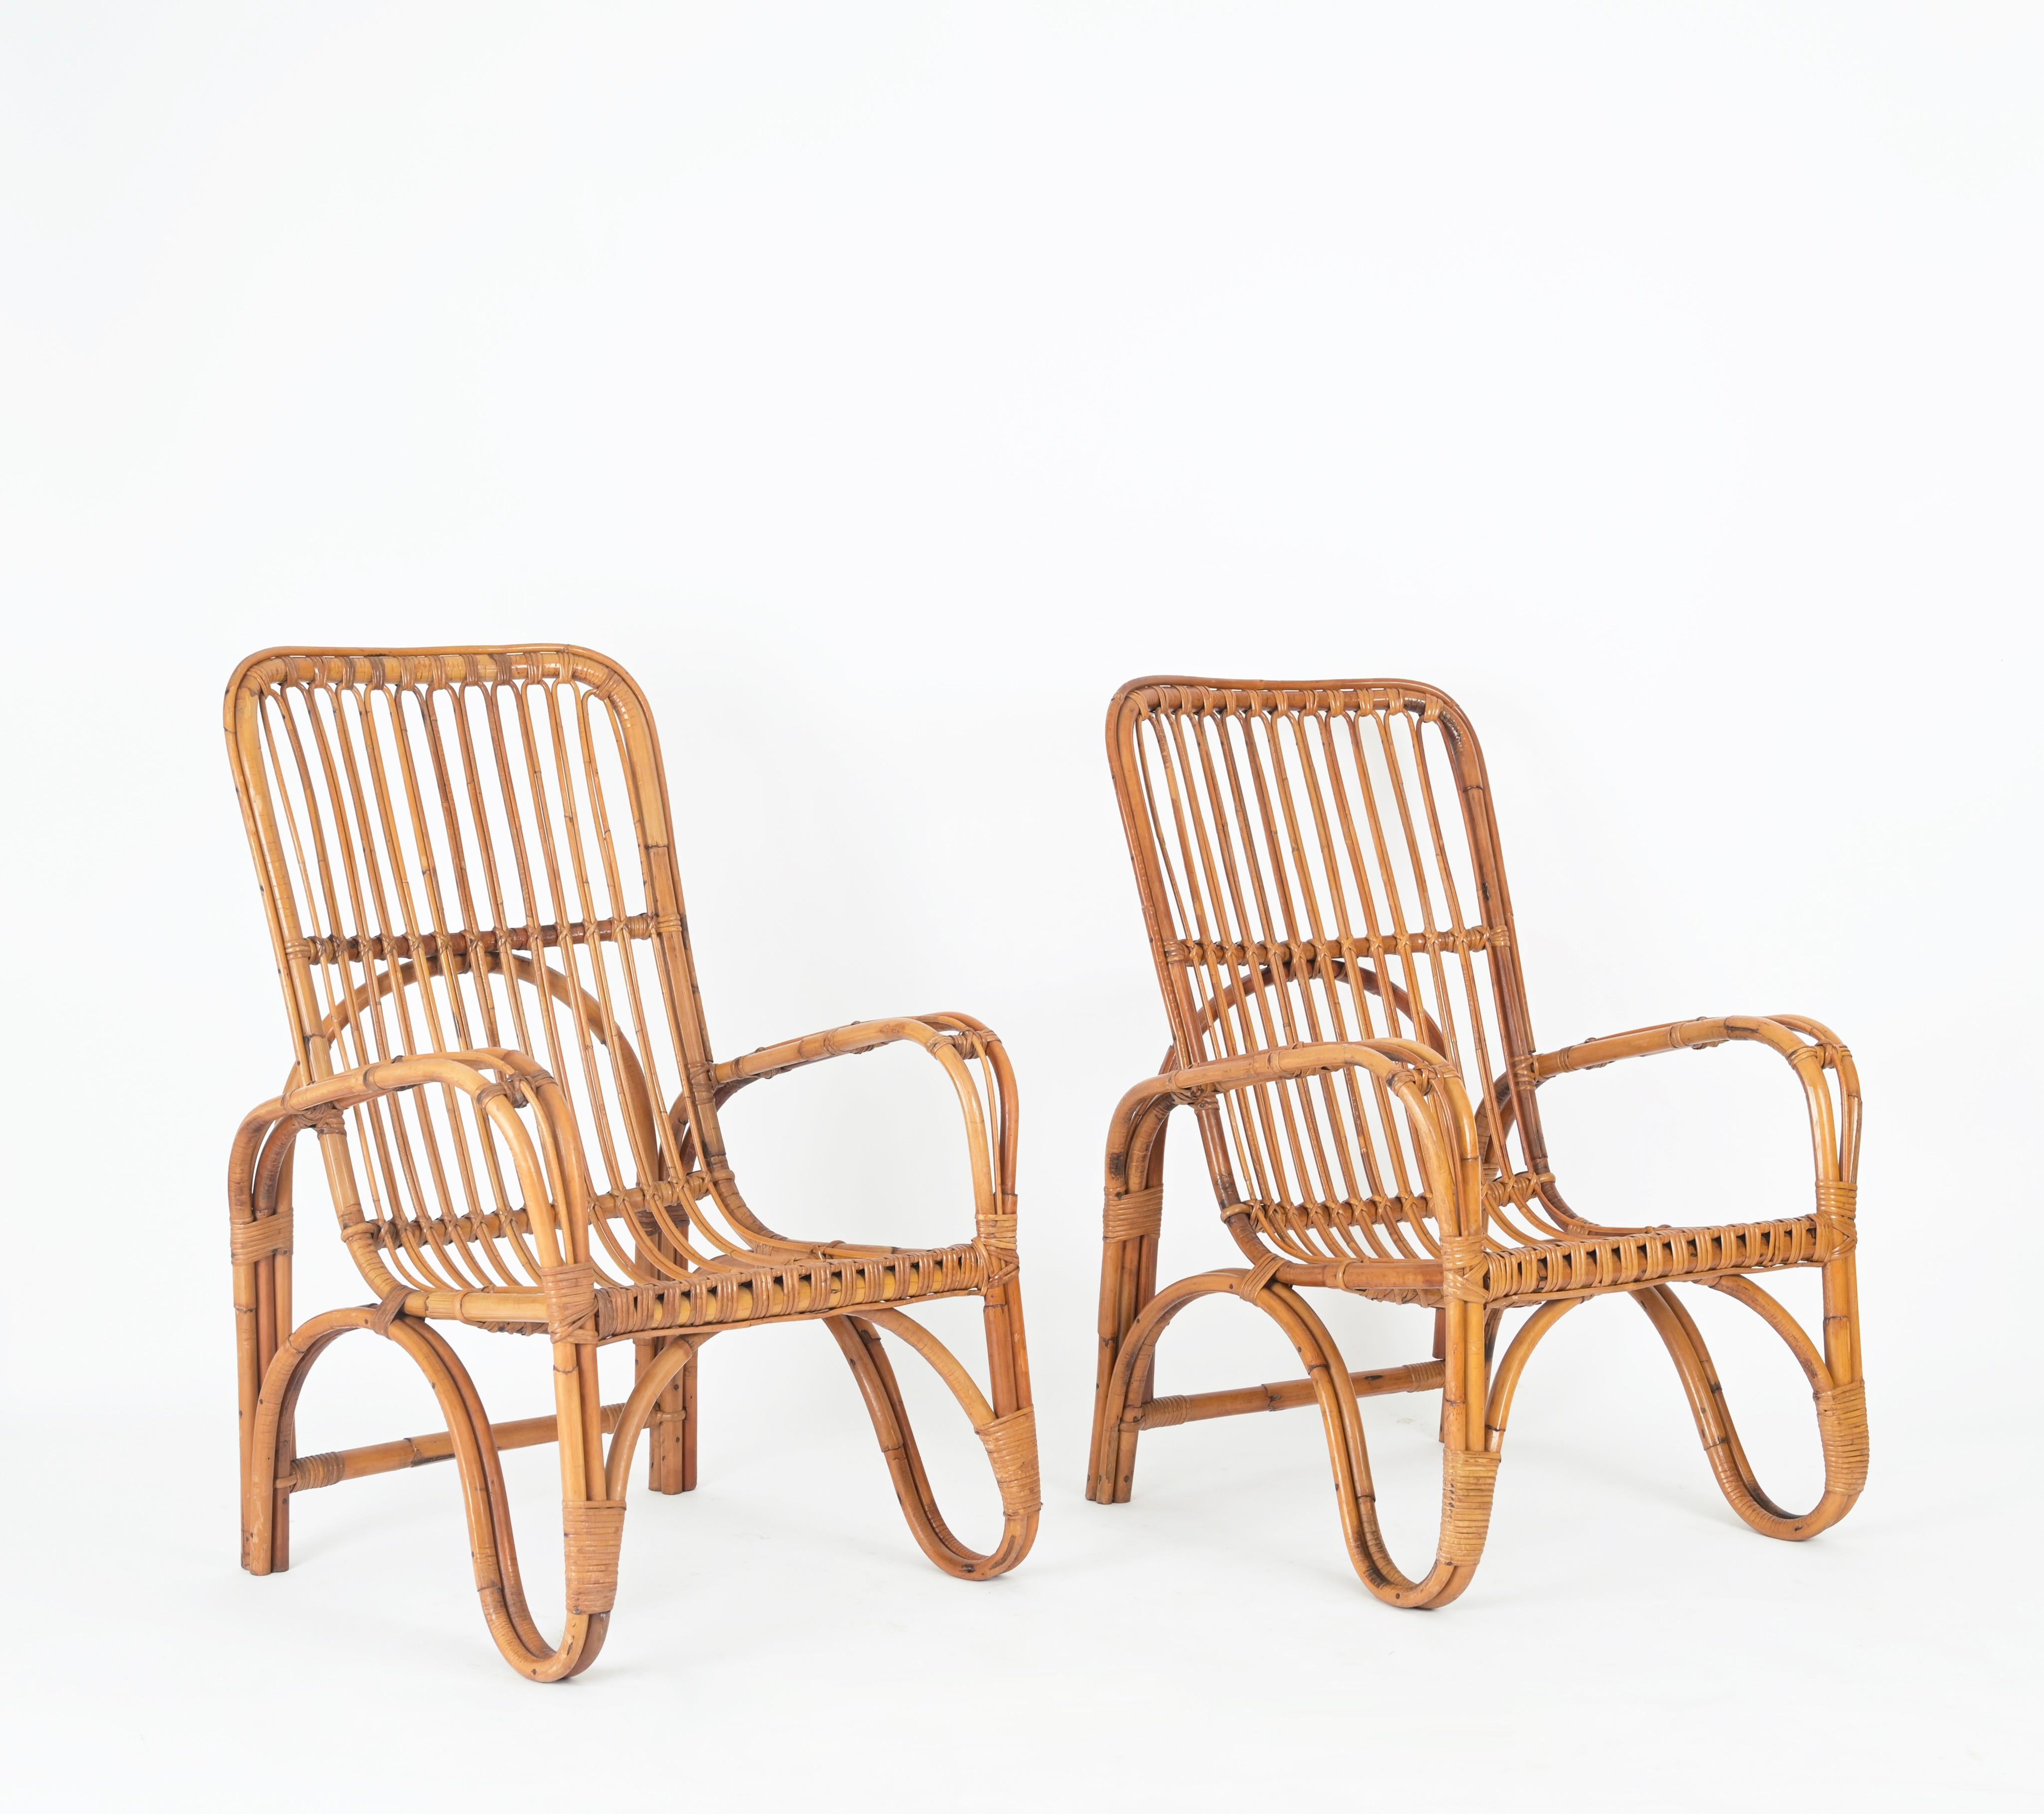 Pair of Midcentury Italian Armchairs in Rattan and Wicker, Tito Agnoli, 1960s For Sale 4